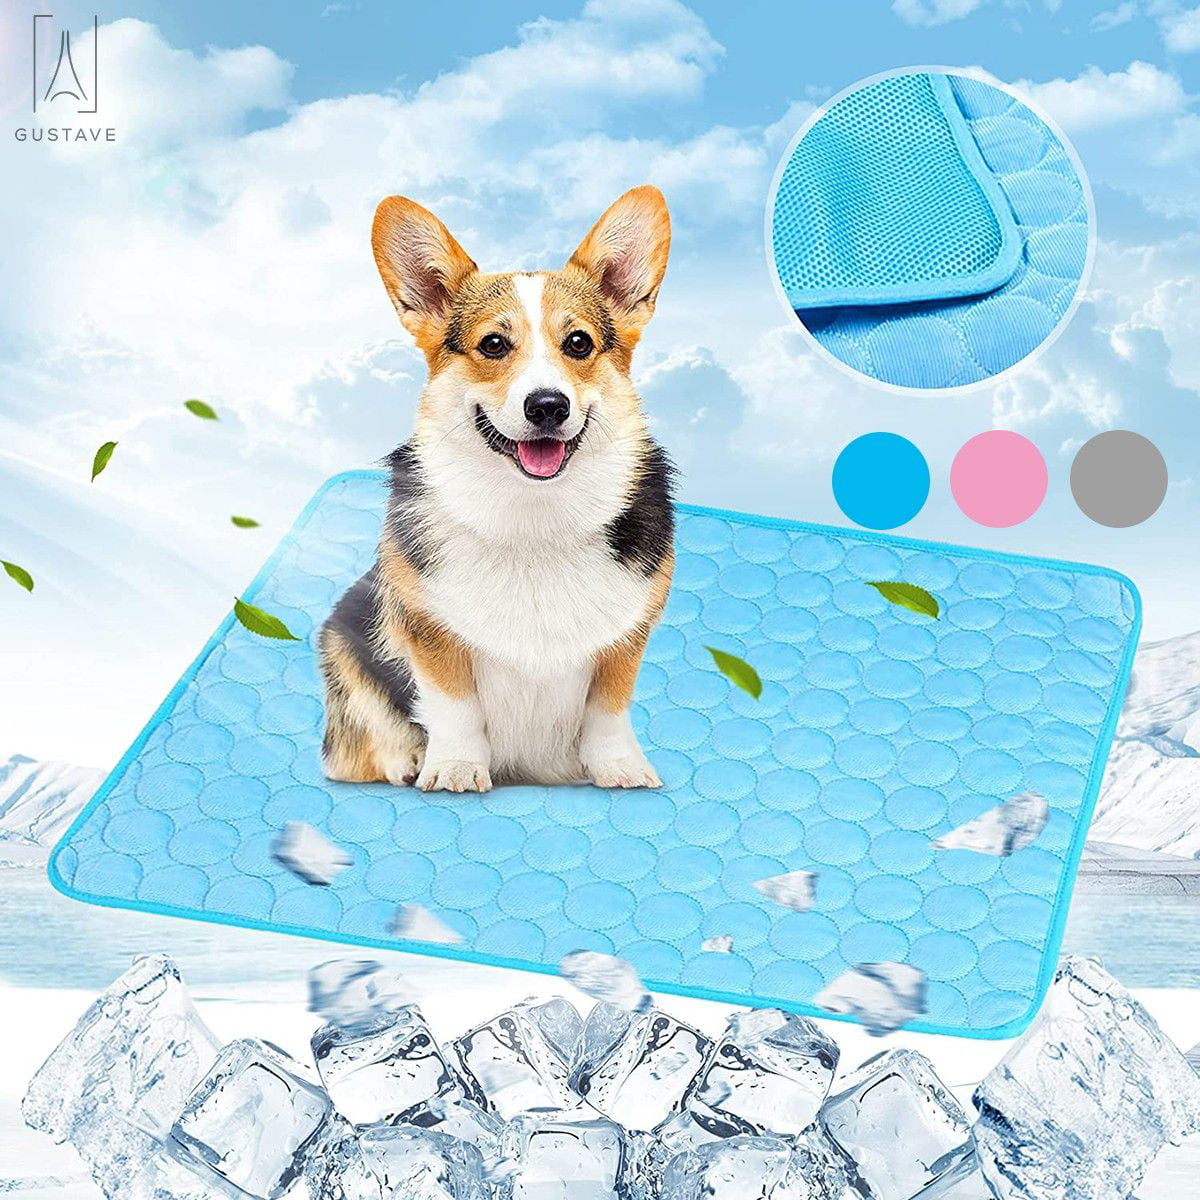 Gustave Summer Pet Self Cooling Mat for Dogs Cats Heat Relief Pad Breathable Ice Silk Surface Cooling Pet Bed Washable Comfort Blanket Sleep Mat 